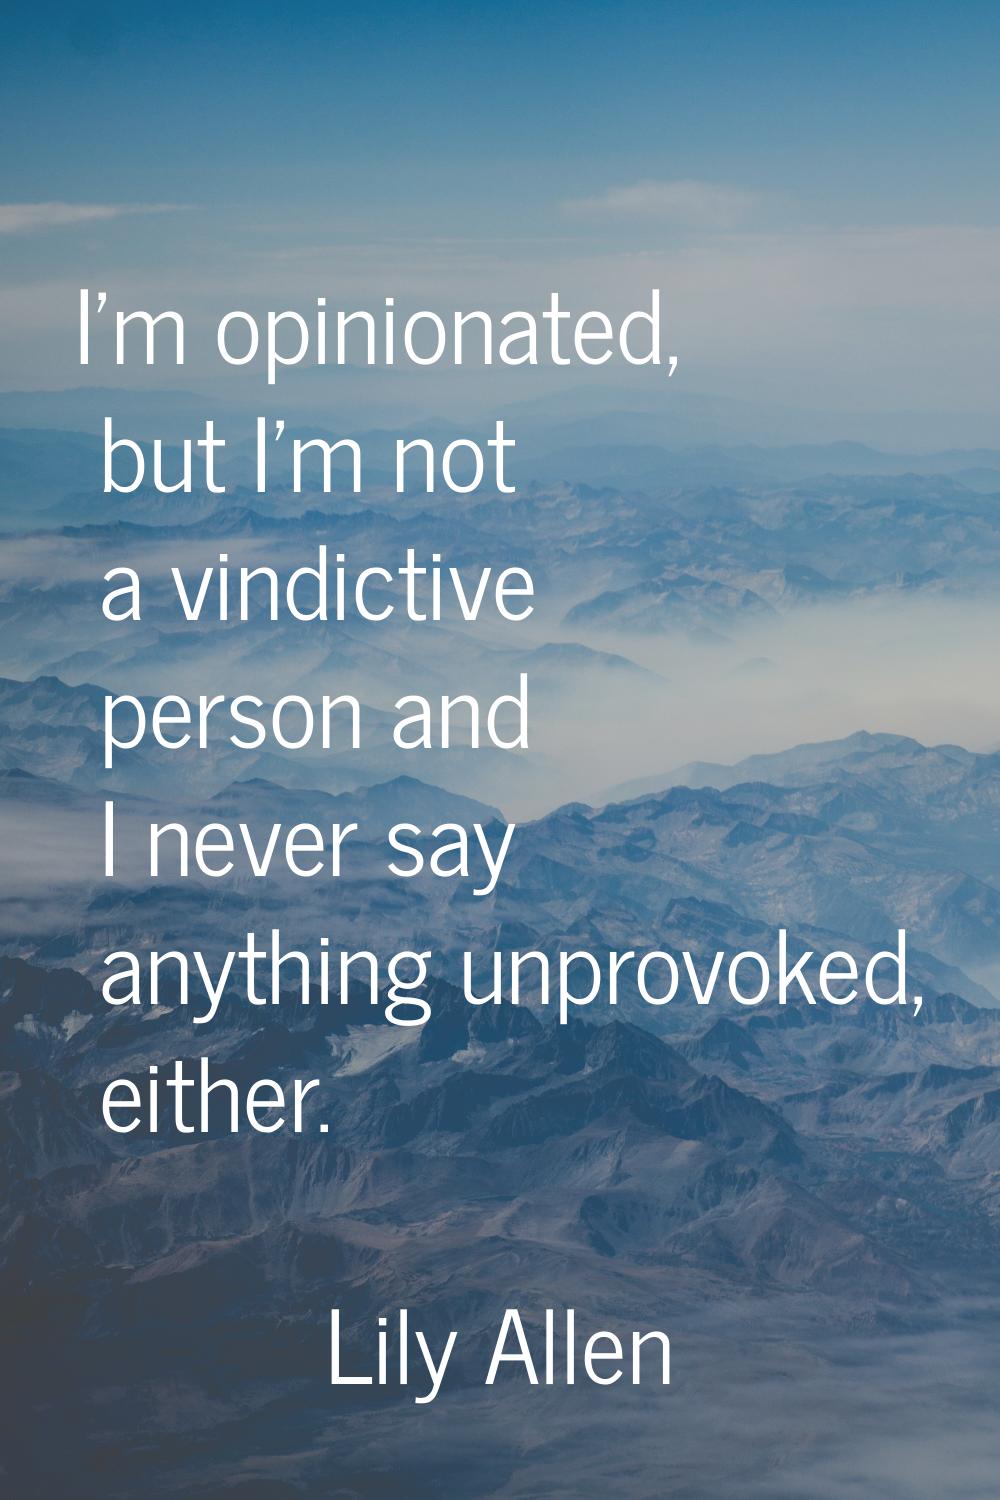 I'm opinionated, but I'm not a vindictive person and I never say anything unprovoked, either.